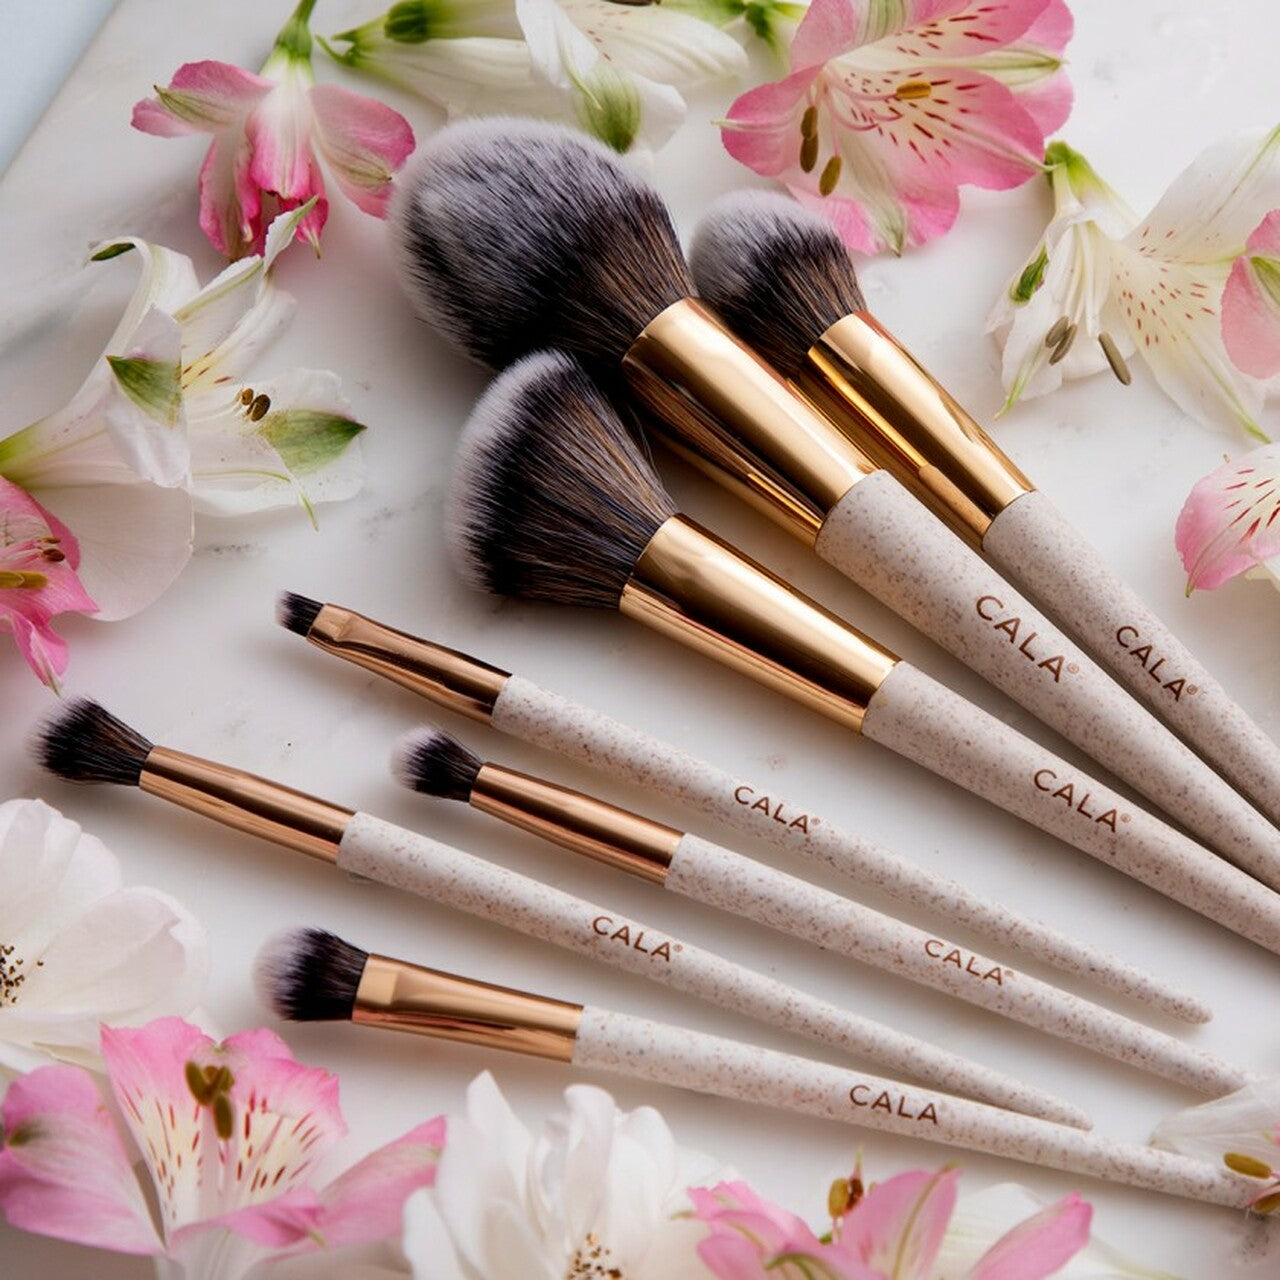 THE ESSENTIAL EYE TOOLS - MAKEUP BRUSHES